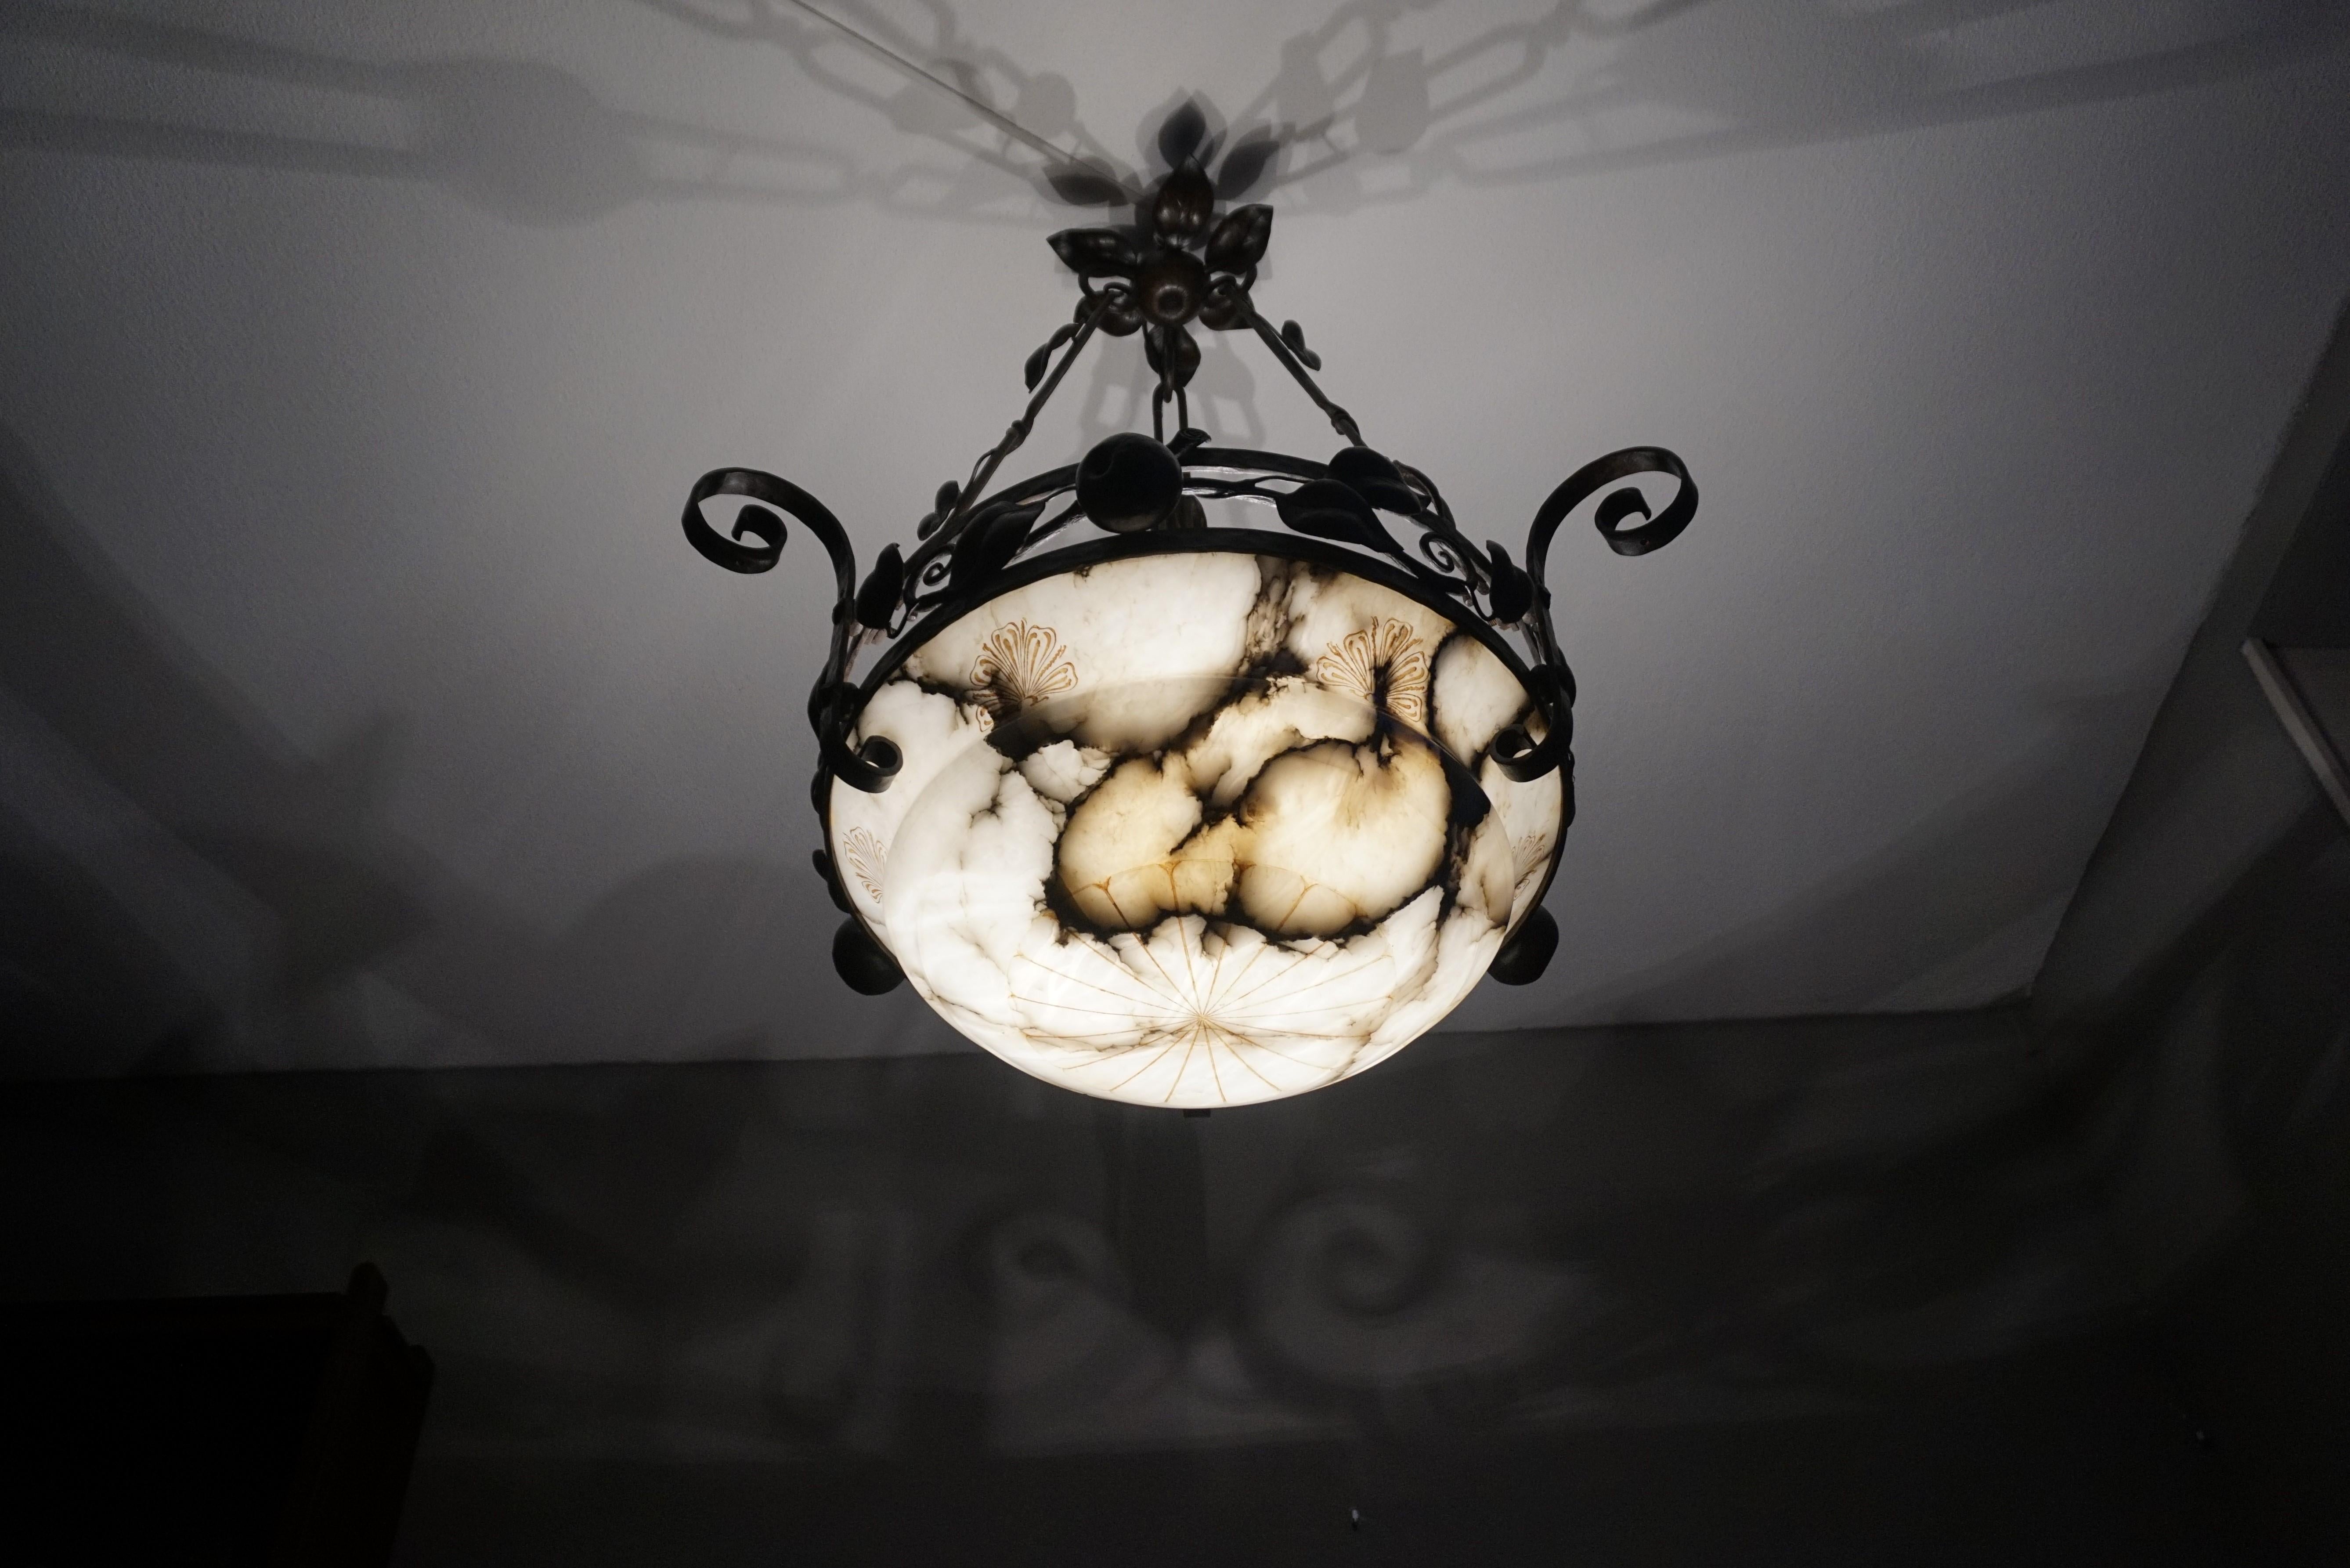 Large Arts and Crafts Alabaster & Wrought Iron Chandelier with Apple Sculptures For Sale 9